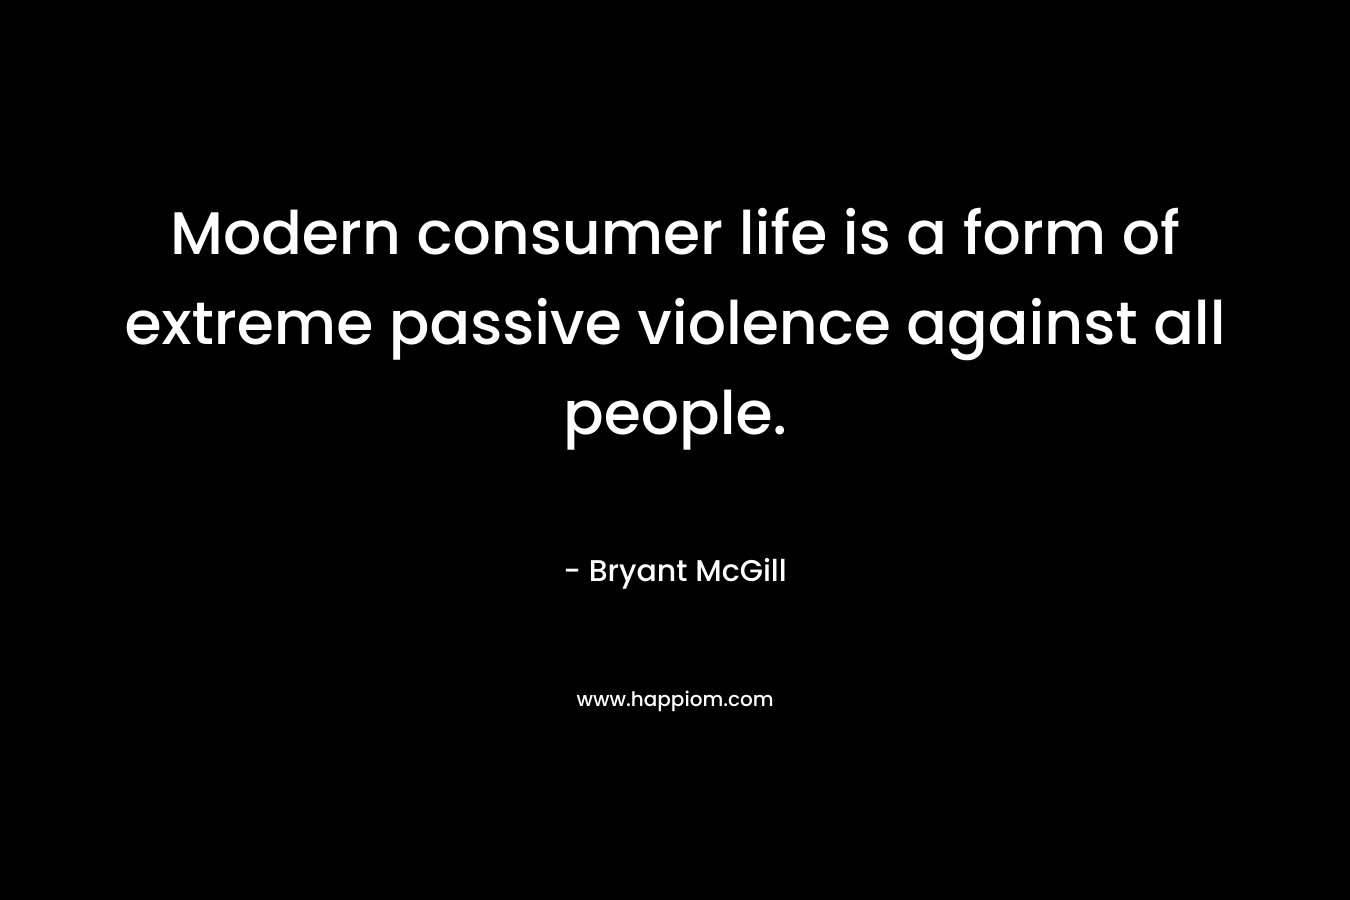 Modern consumer life is a form of extreme passive violence against all people.